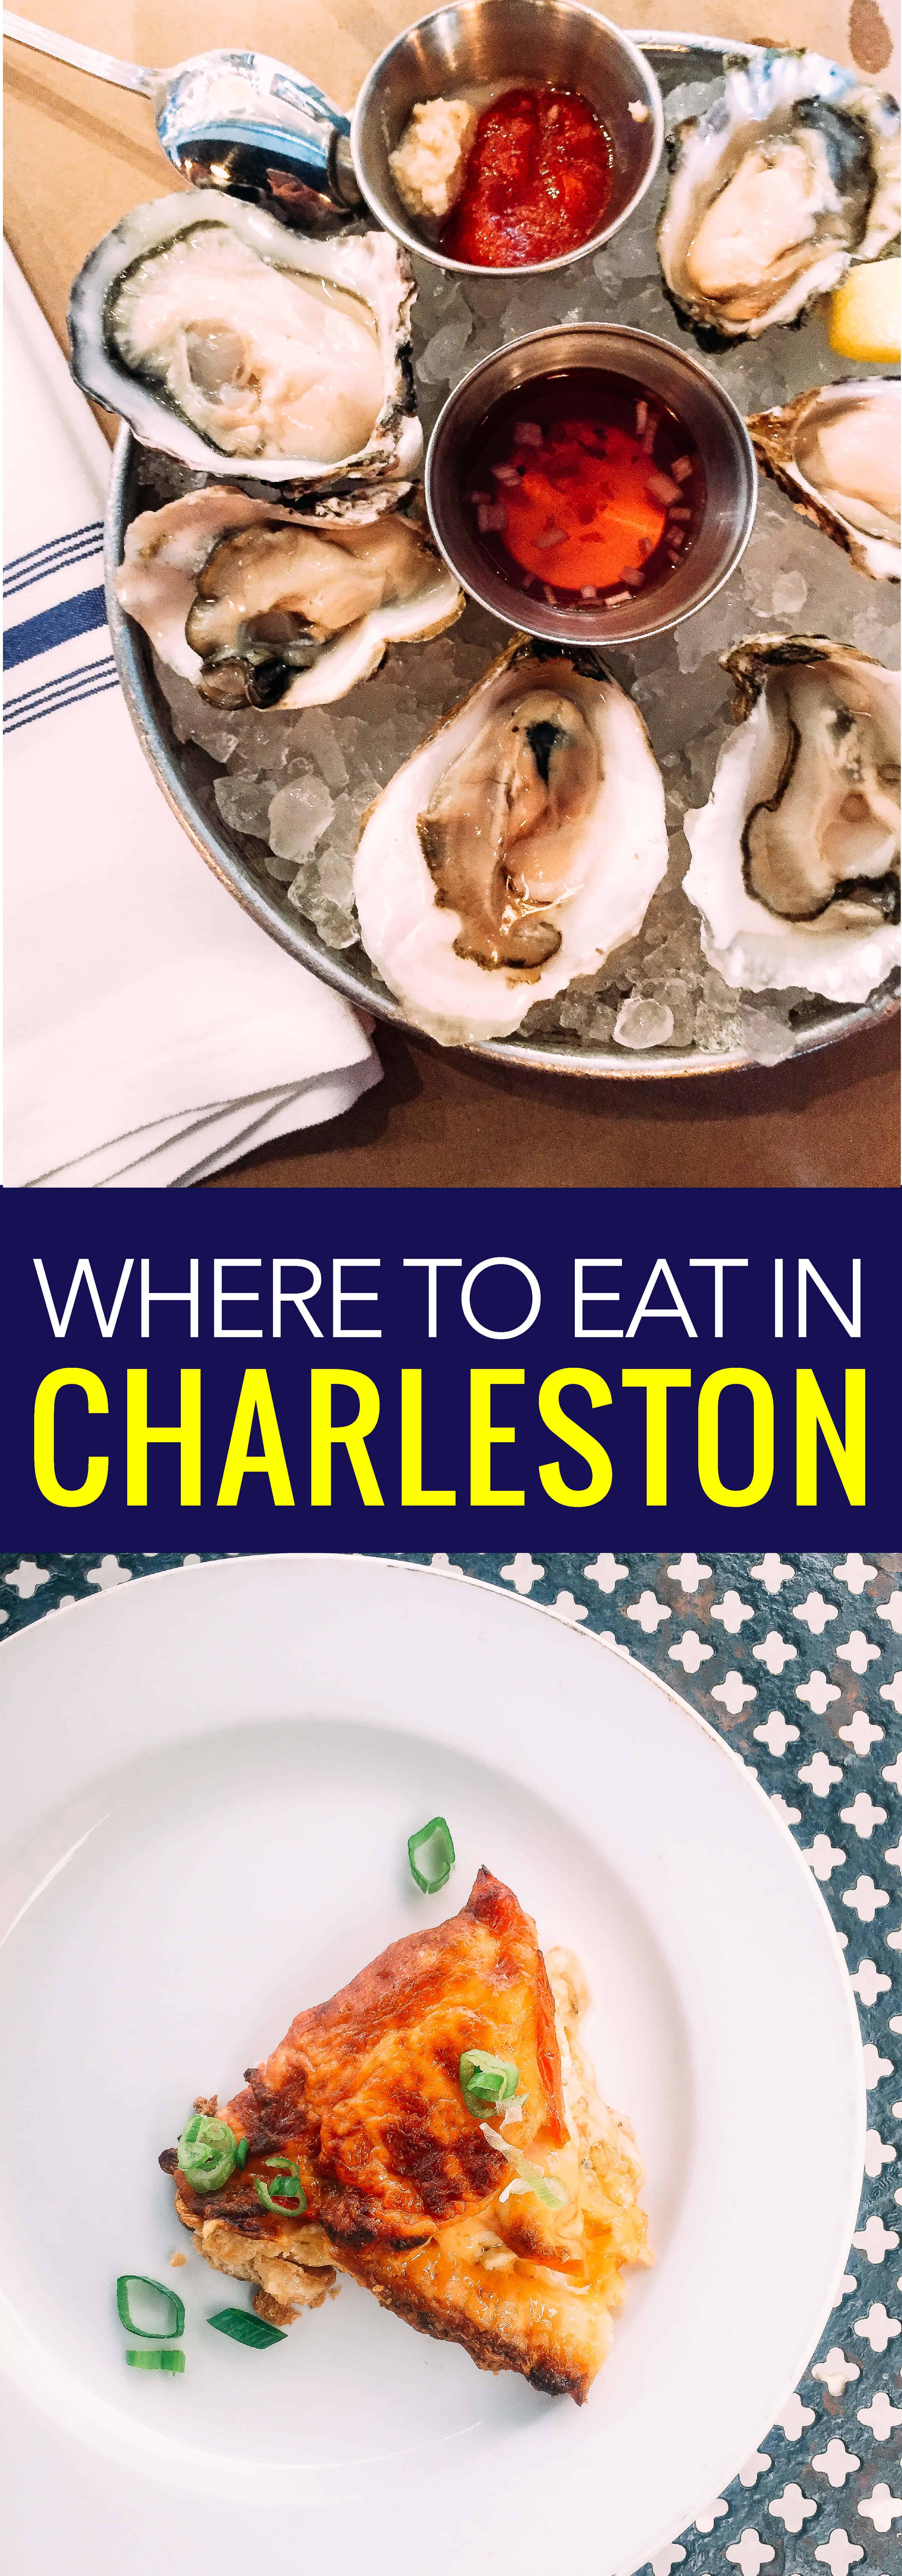  The ultimate guide to downtown Charleston restaurants, including the new hot restaurants and where the locals eat in Charleston.